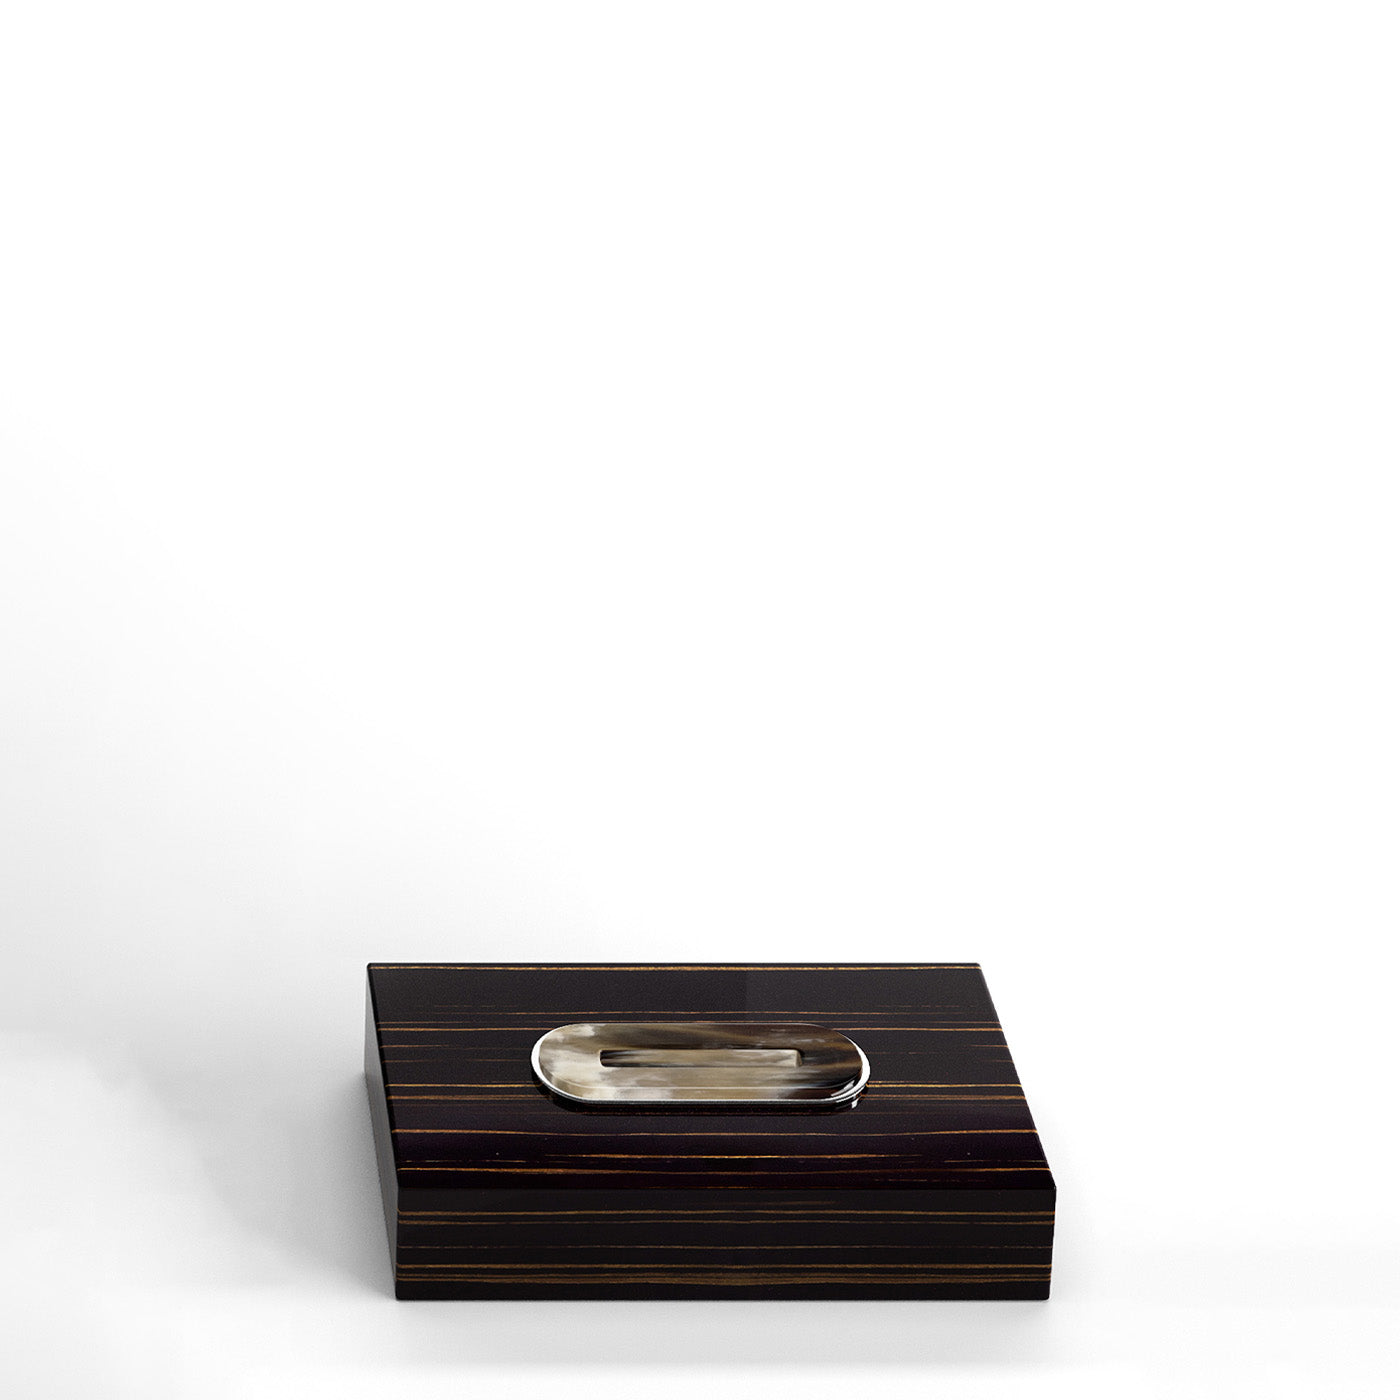 Arcahorn Veletta Tissue Box | Glossy Ebony Finish | Horn and Chromed Brass Detail | Elegant Tissue Box Holder | Explore a Range of Luxury Home Accessories at 2Jour Concierge, #1 luxury high-end gift & lifestyle shop